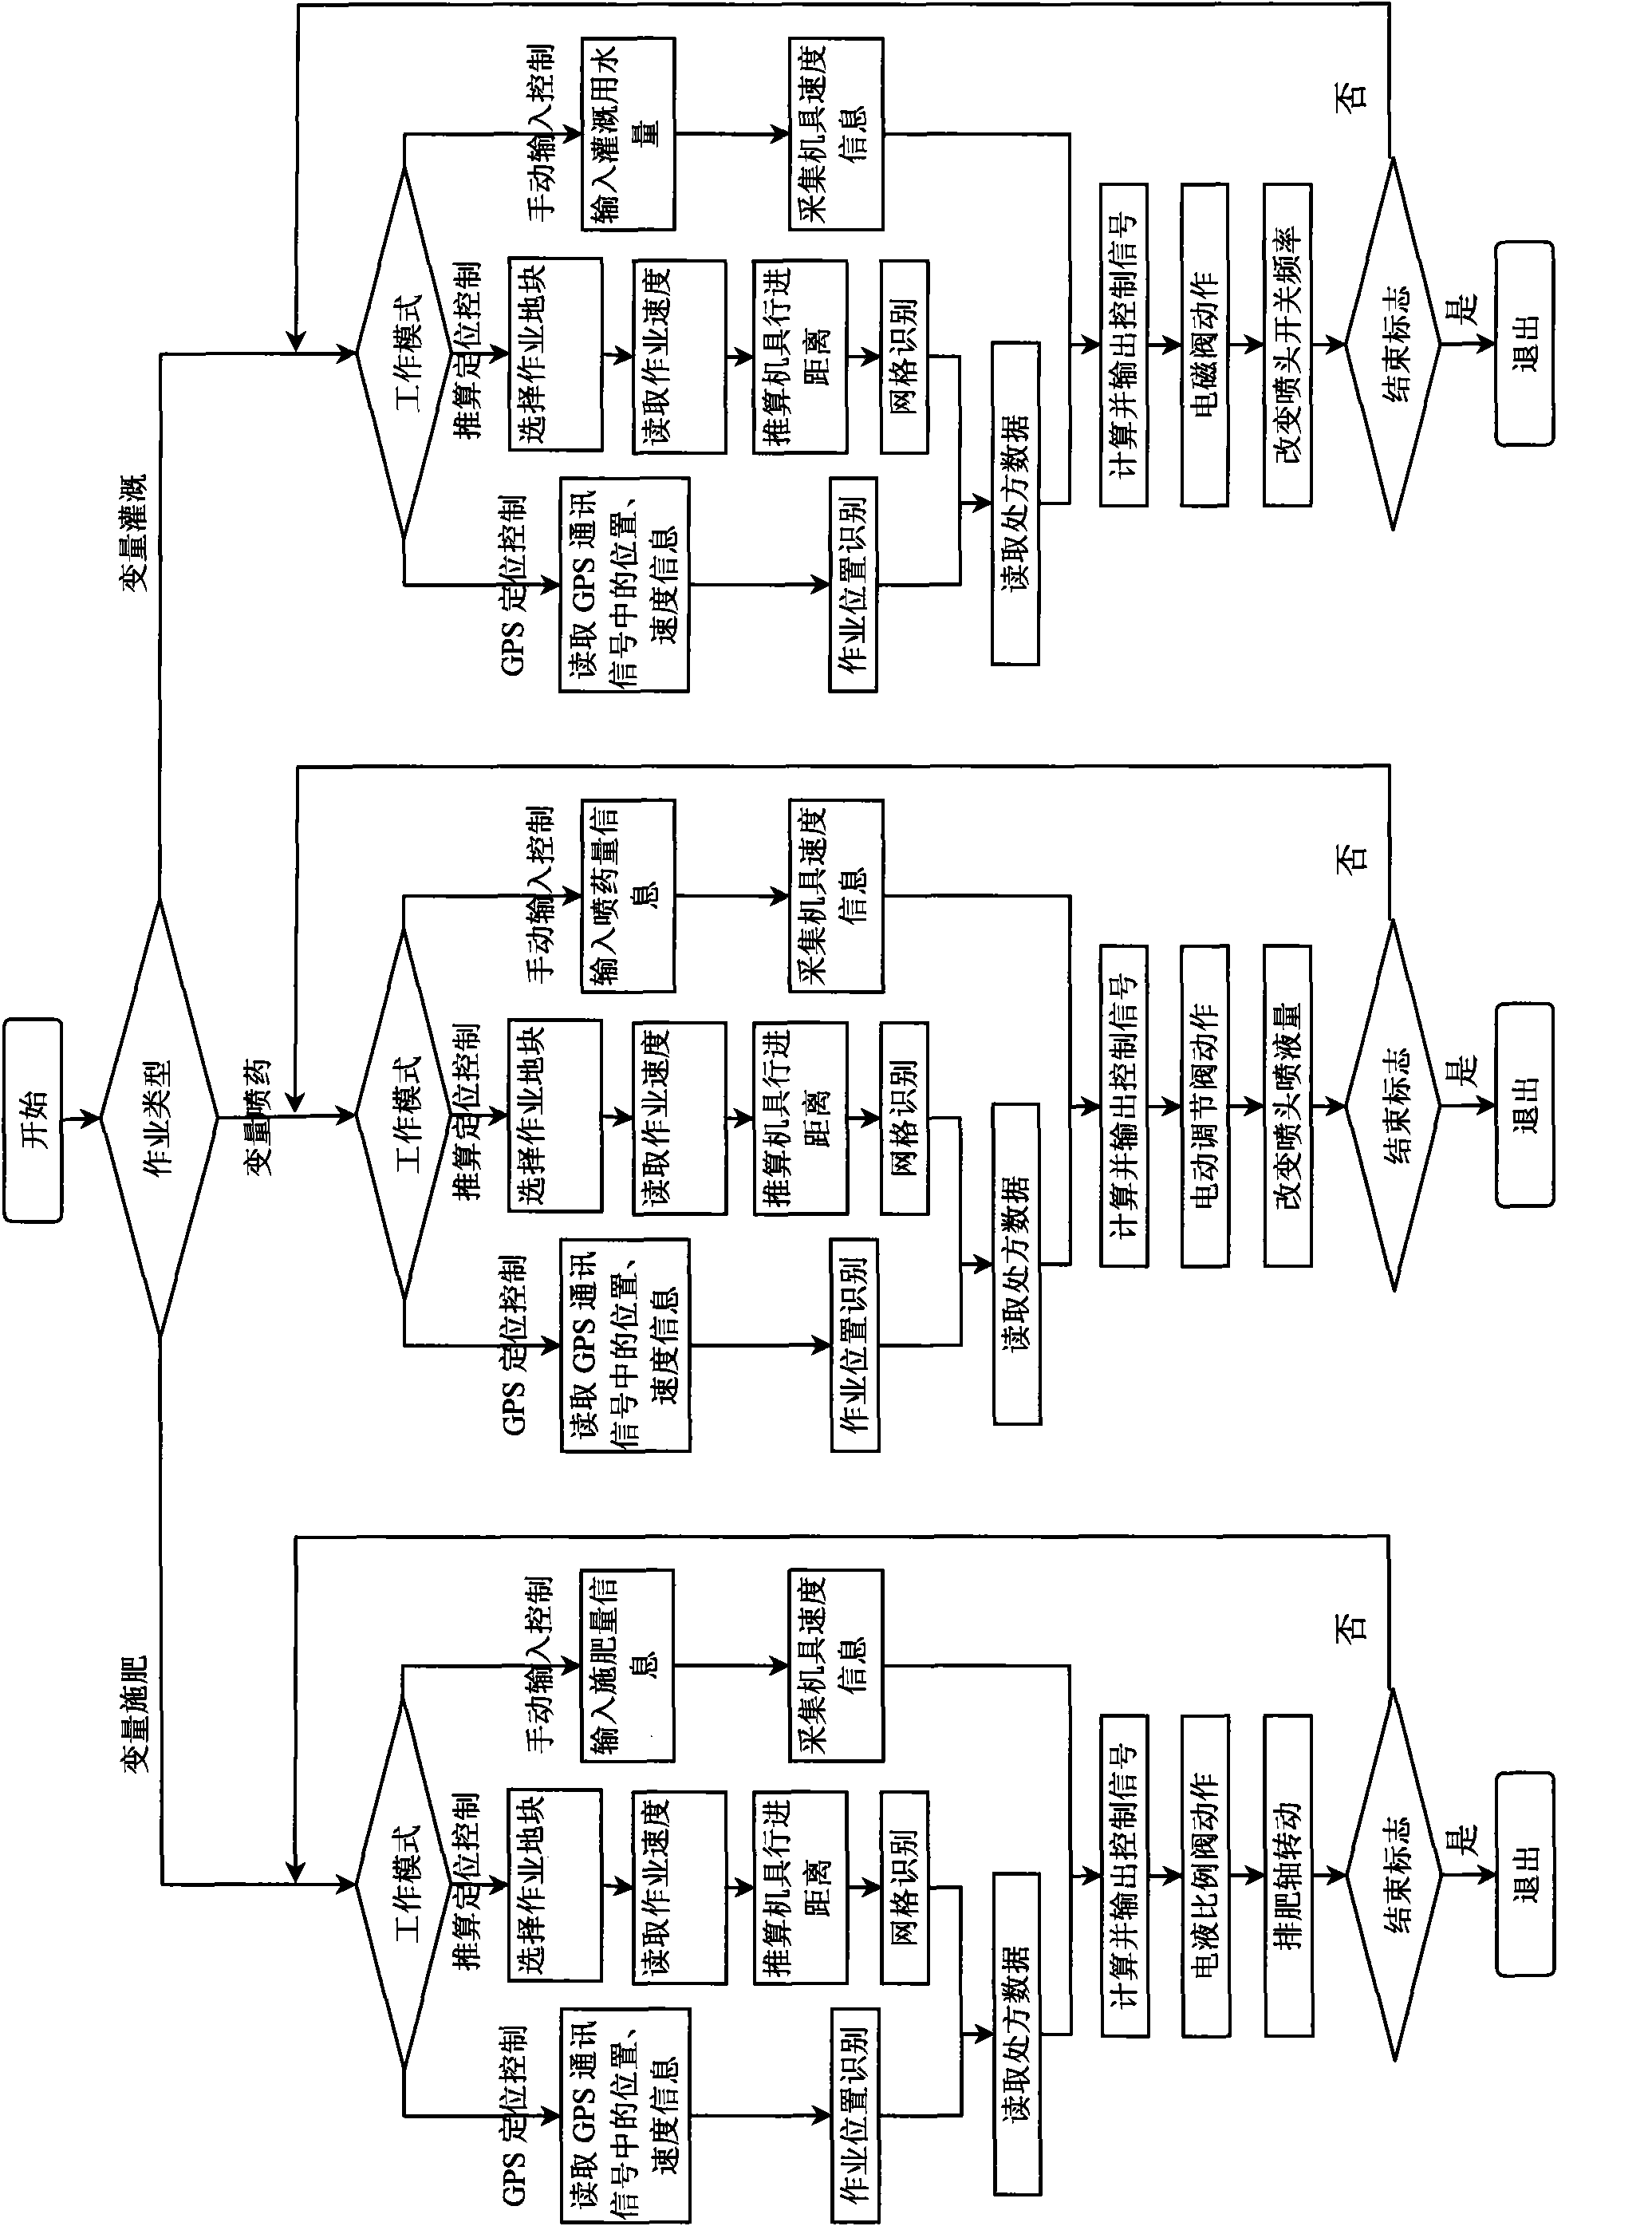 Agricultural multifunctional variable controller